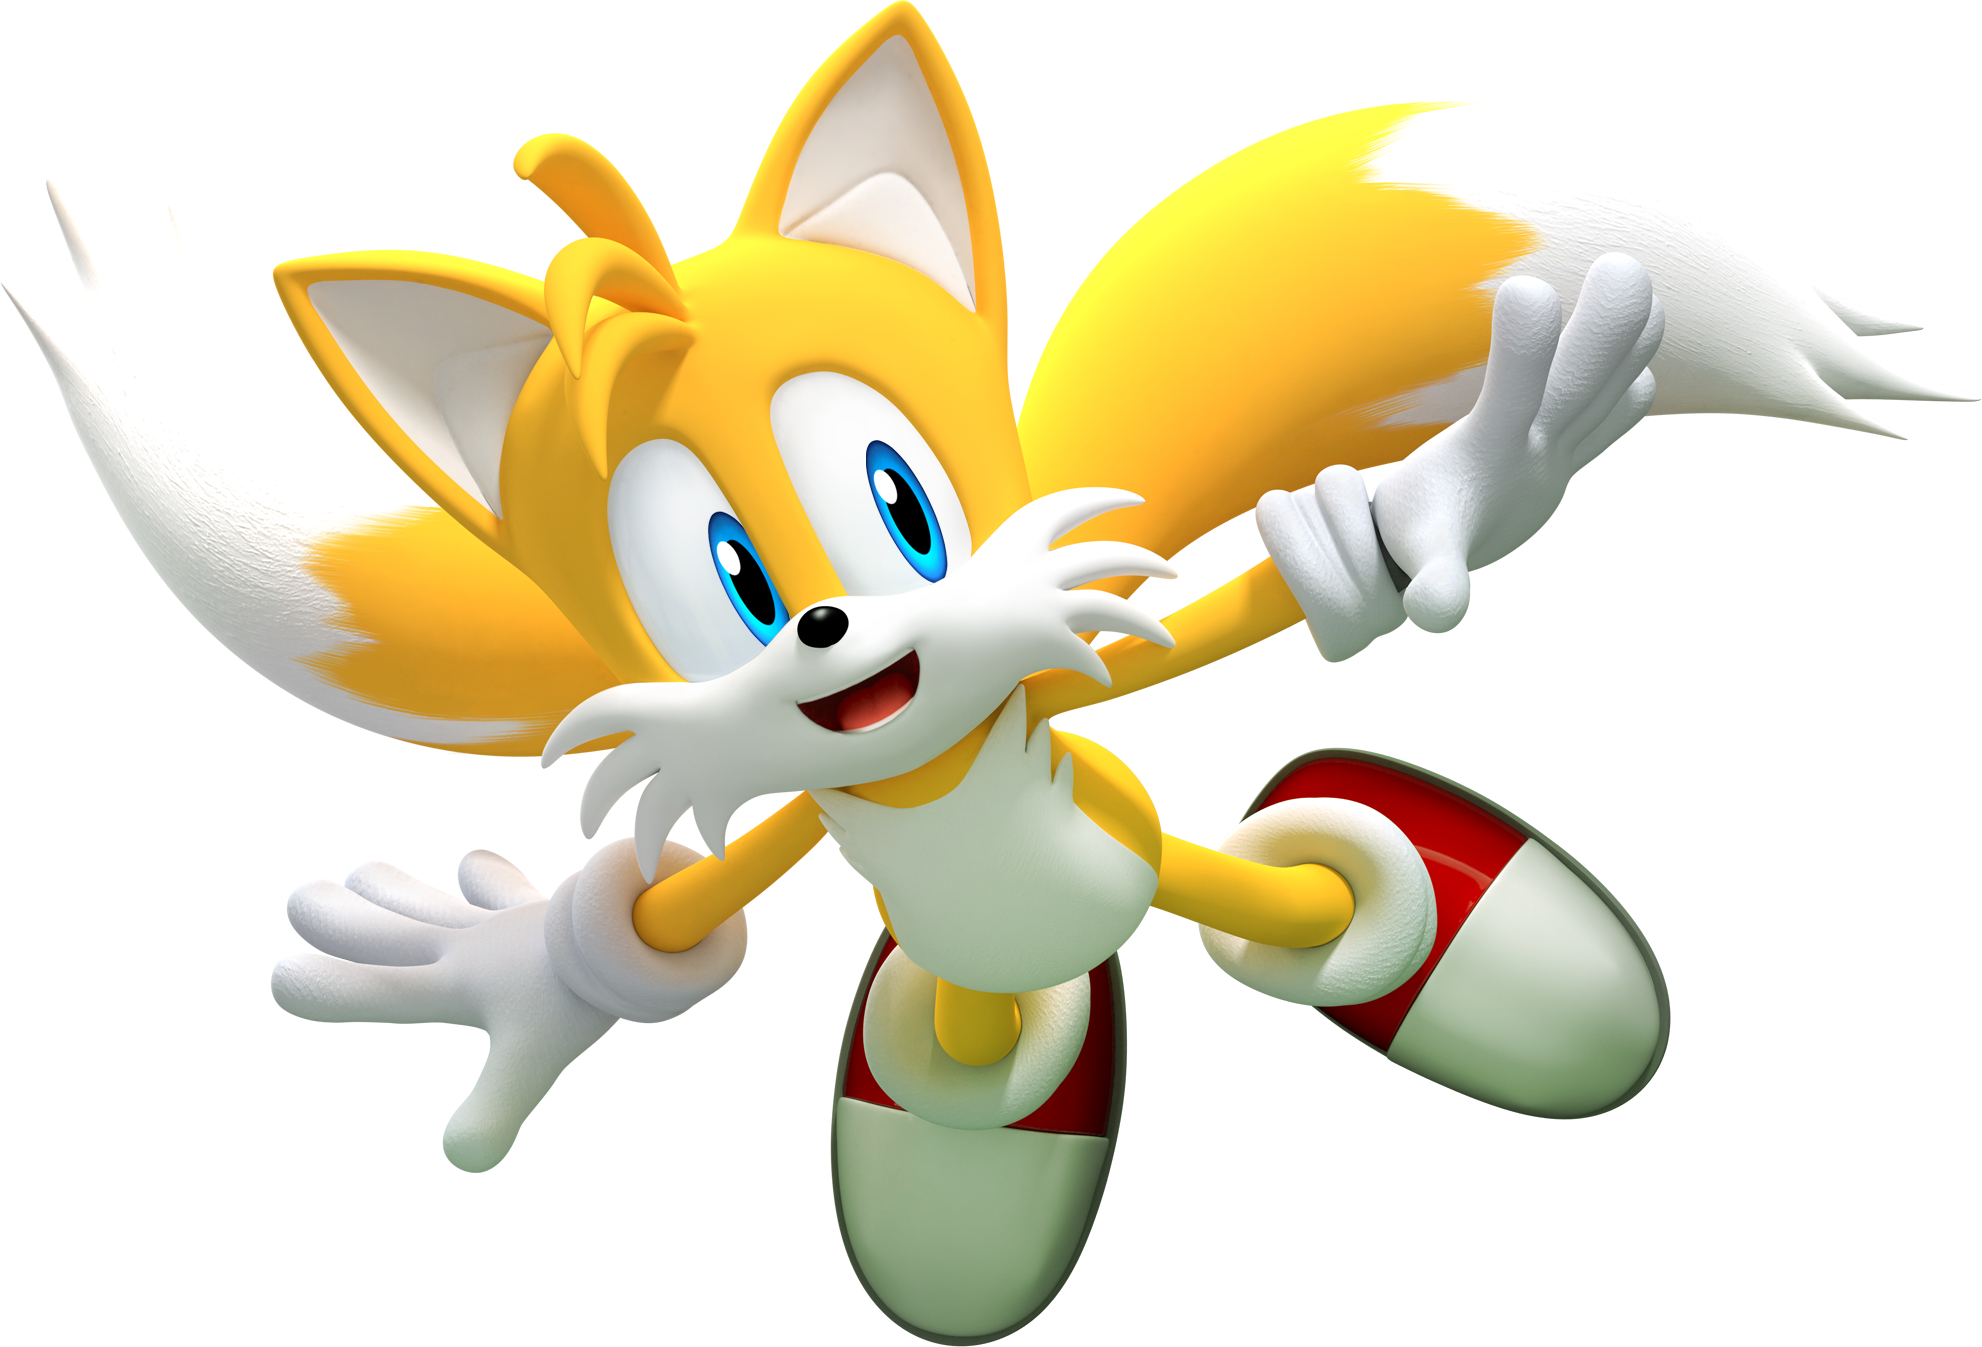 9. Tails